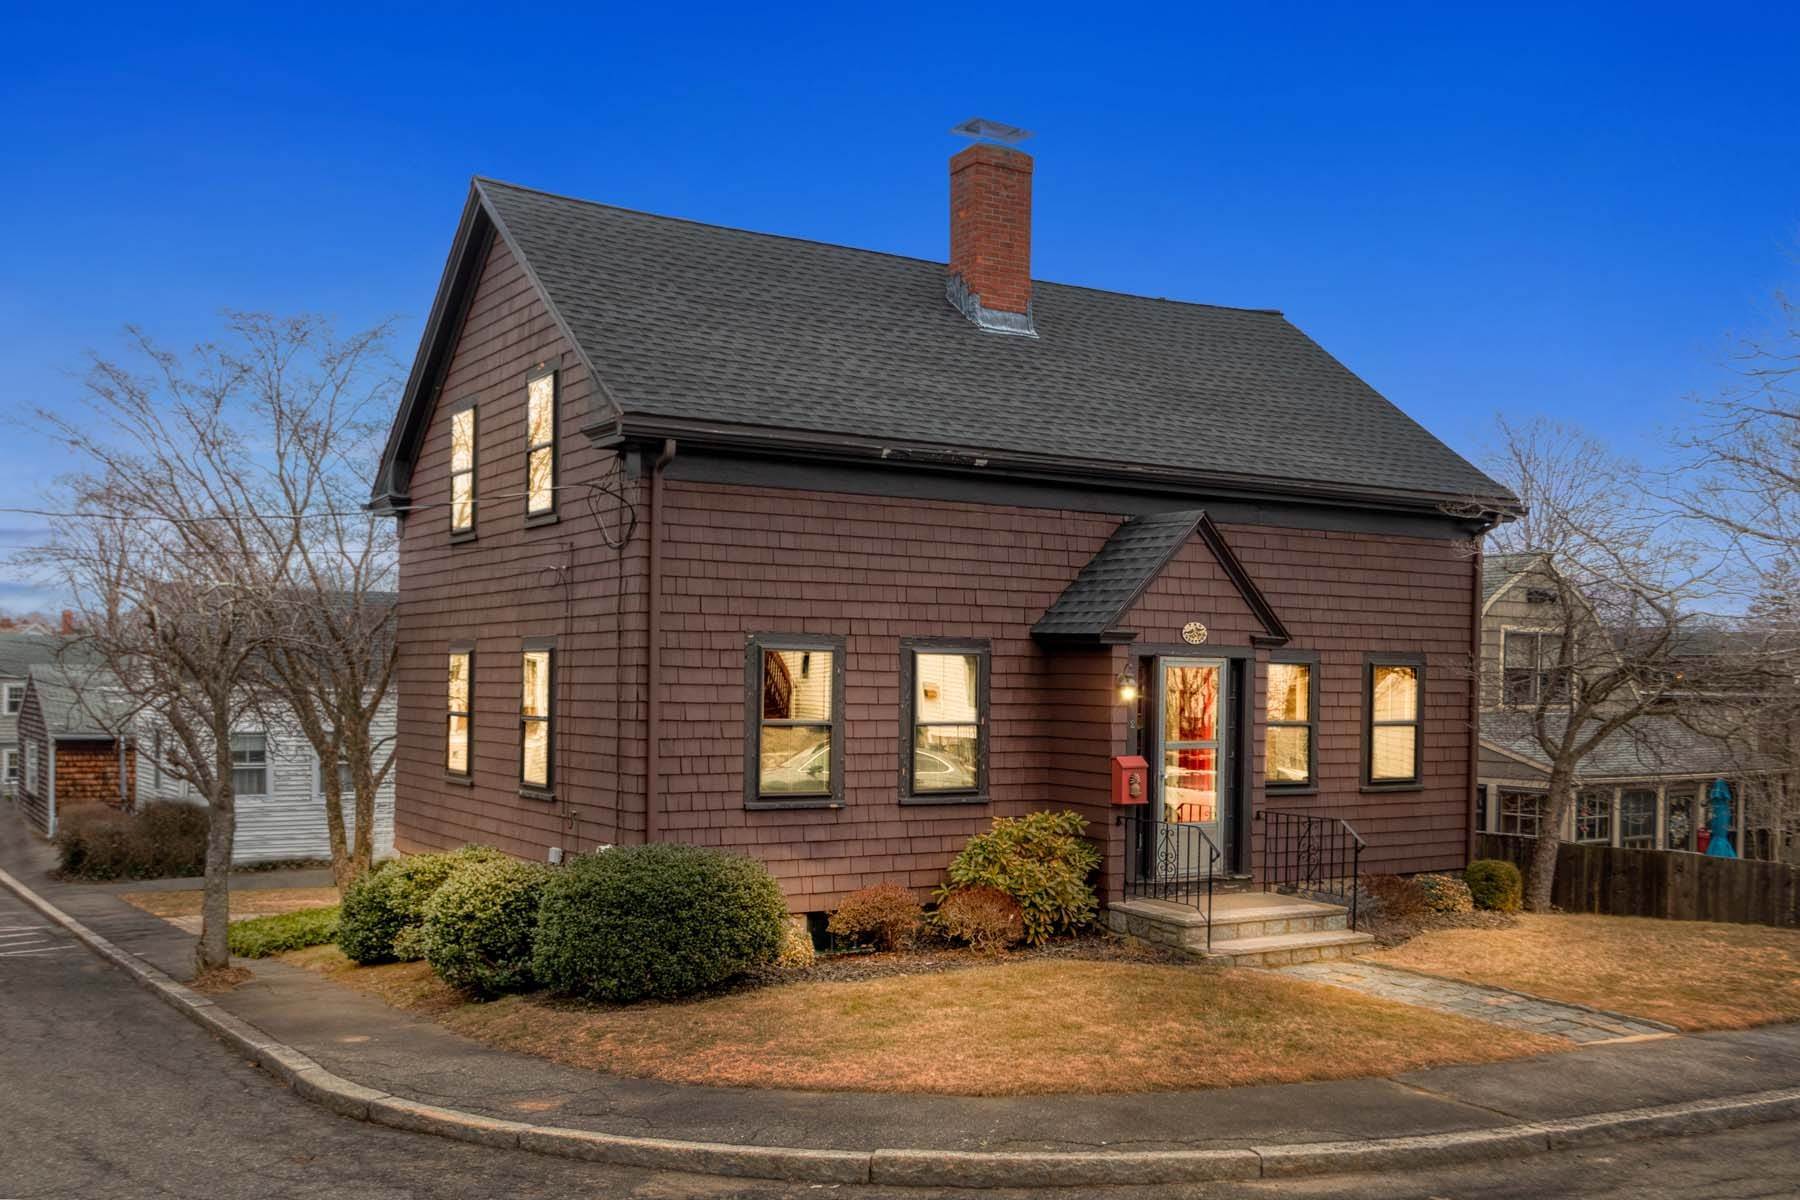 Single Family Homes for Sale at Charming 4 Bedroom Cape 2 Chestnut Street Marblehead, Massachusetts 01945 United States